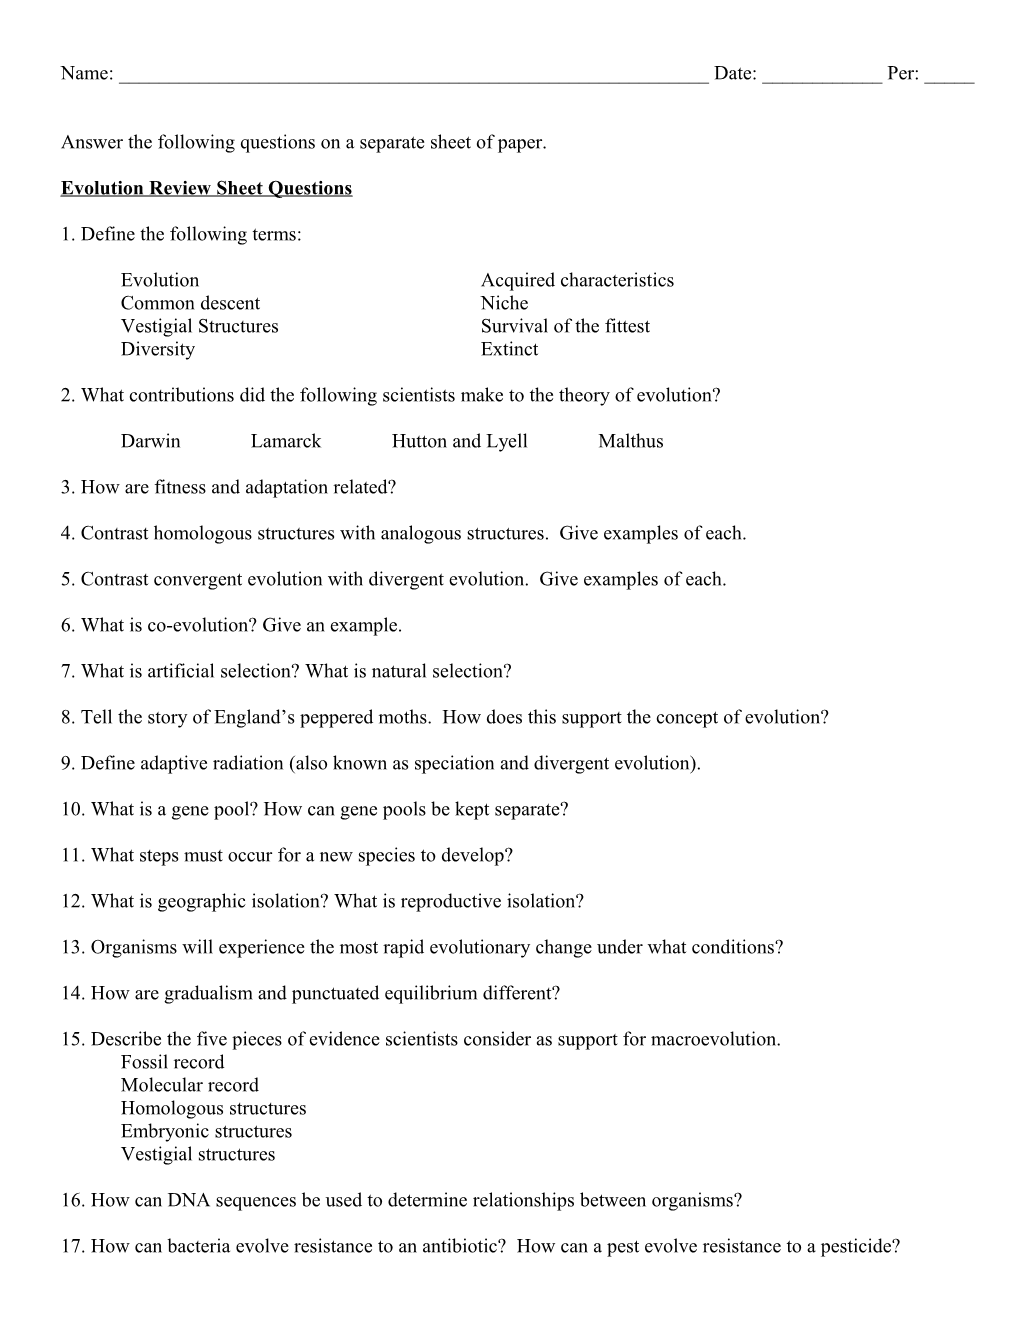 Evolution Review Sheet Questions